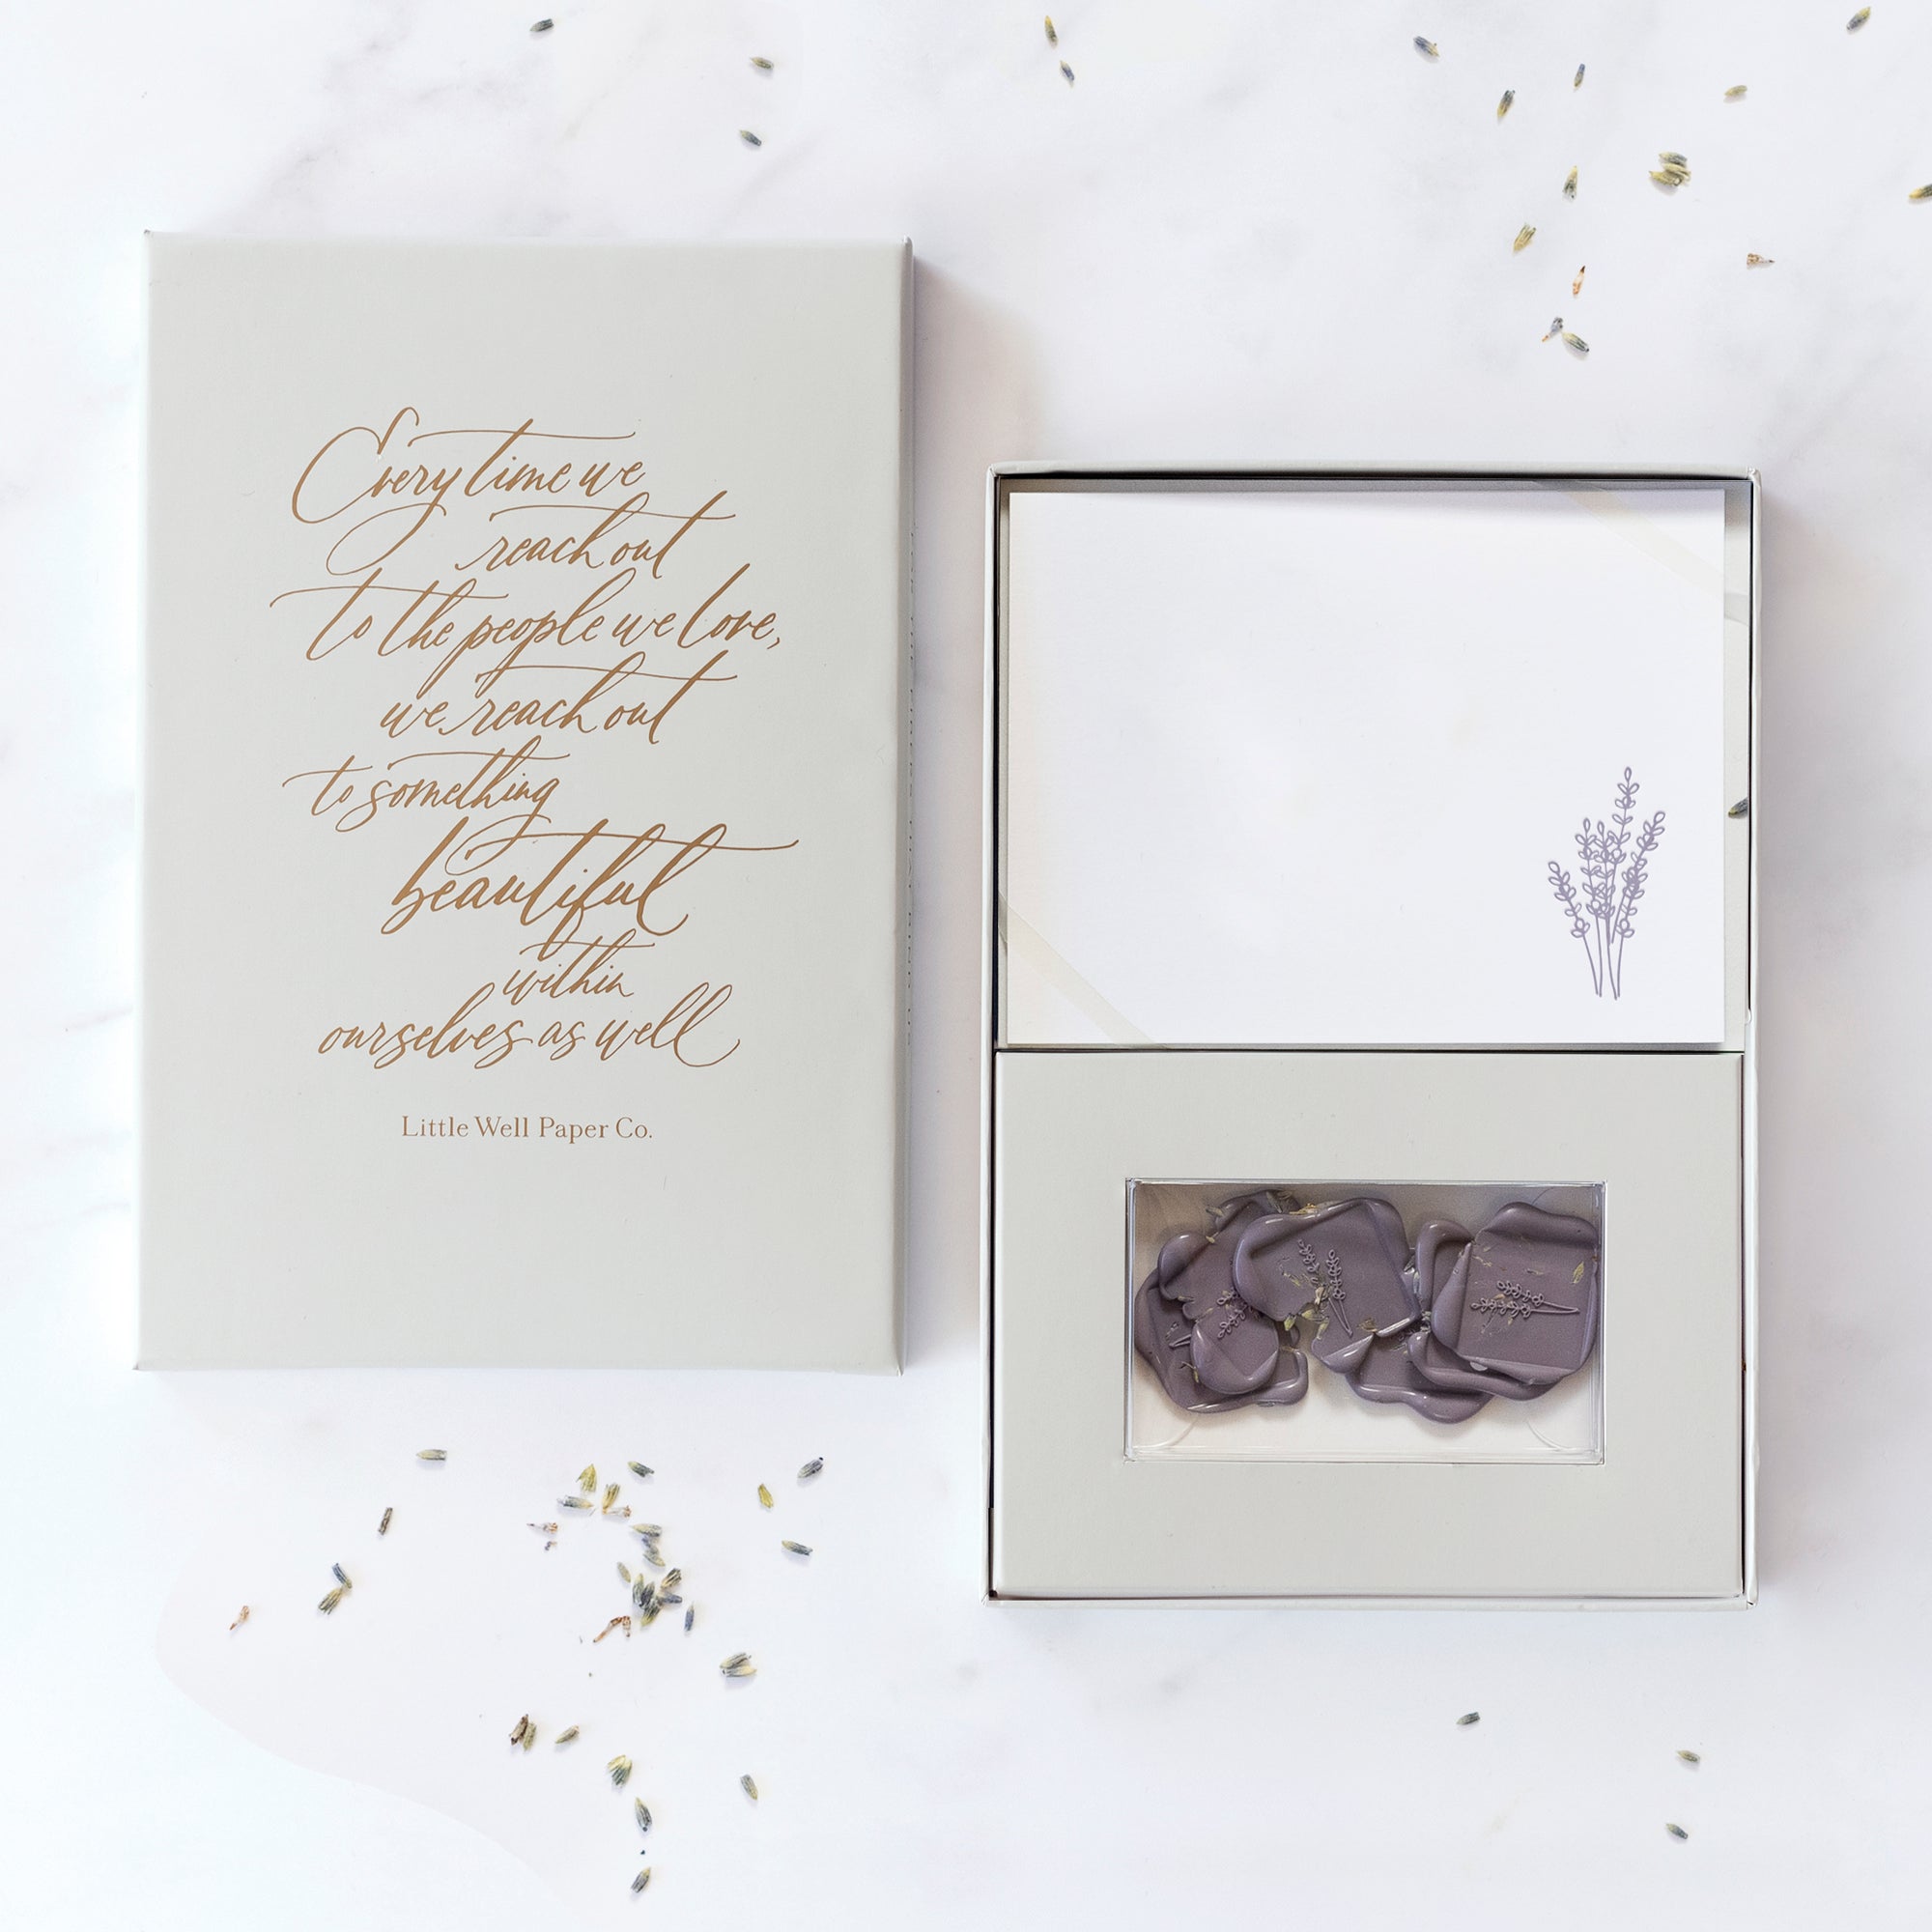 Our "Lavender" flat note stationery set includes a set of 6 hand printed cards and envelopes with 6 professional grade, self adhesive wax seals.